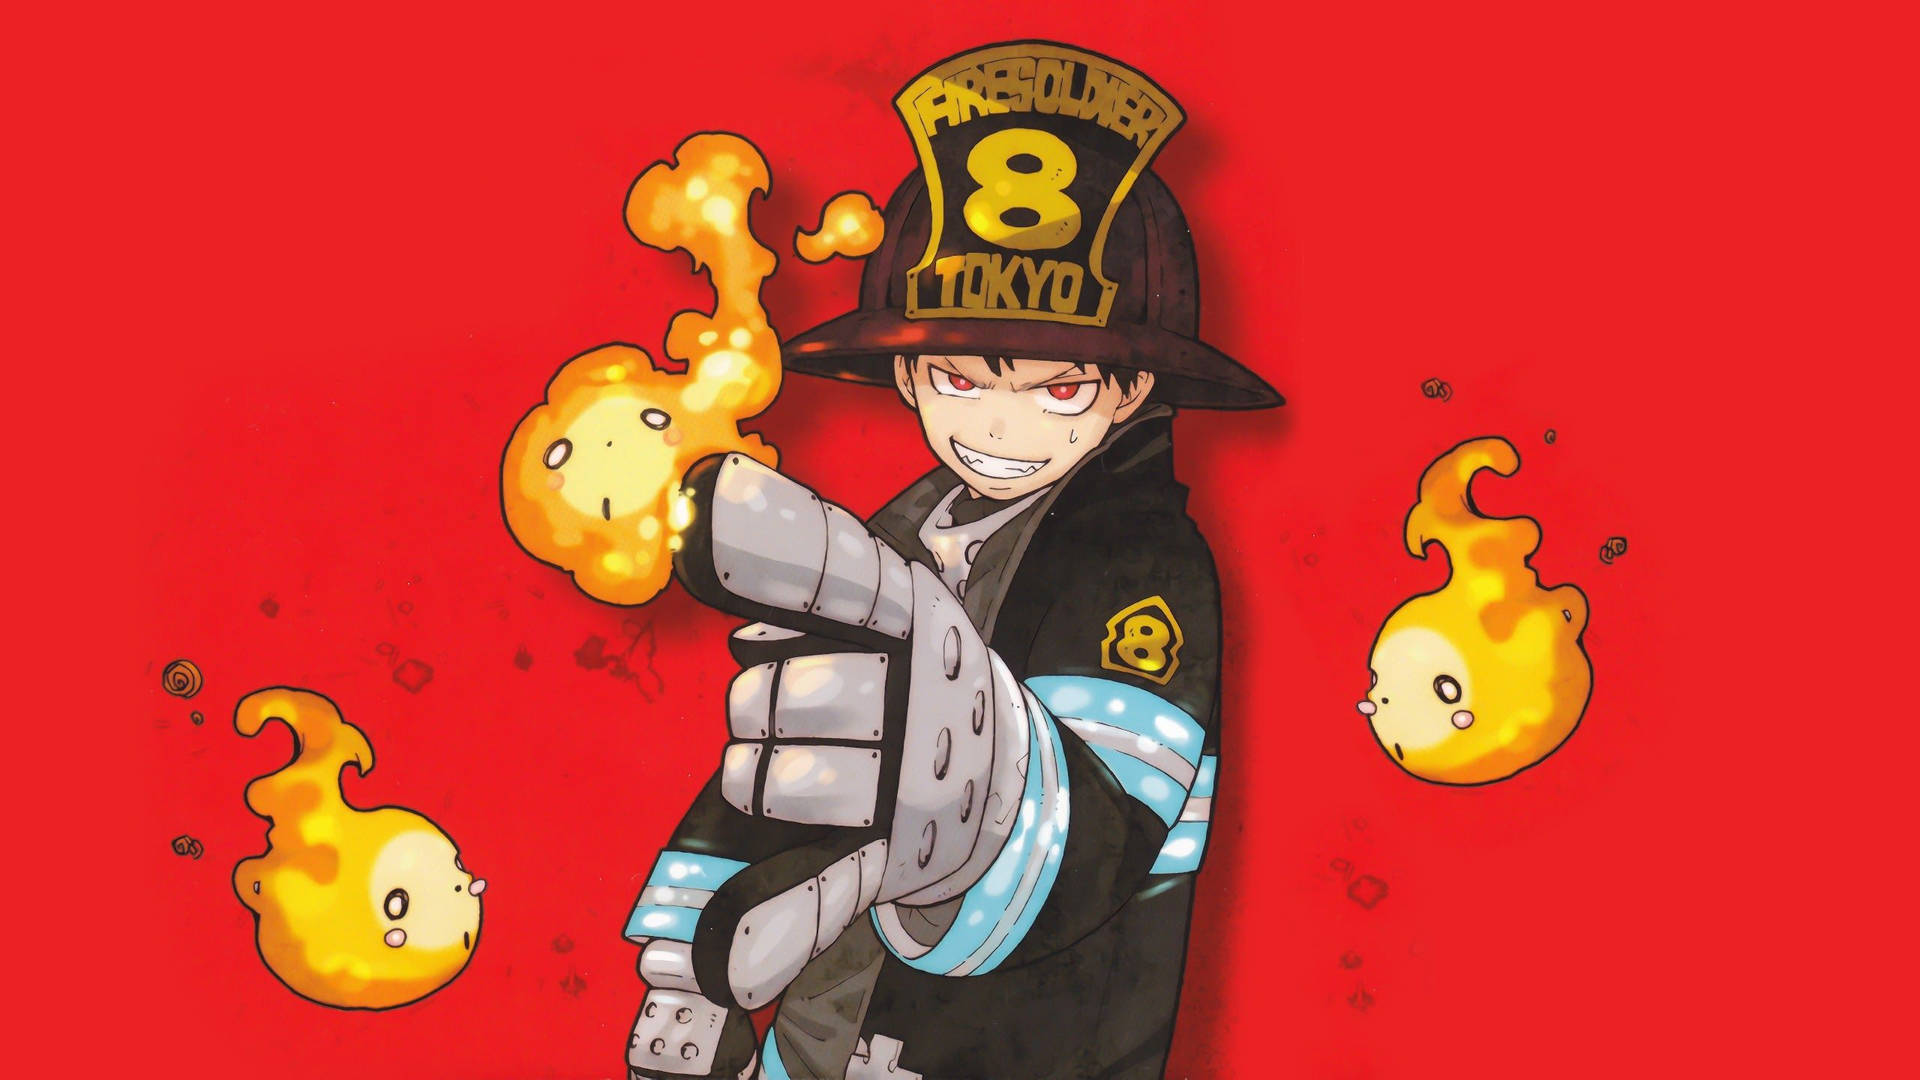 Fire Force 2560X1440 Wallpaper and Background Image